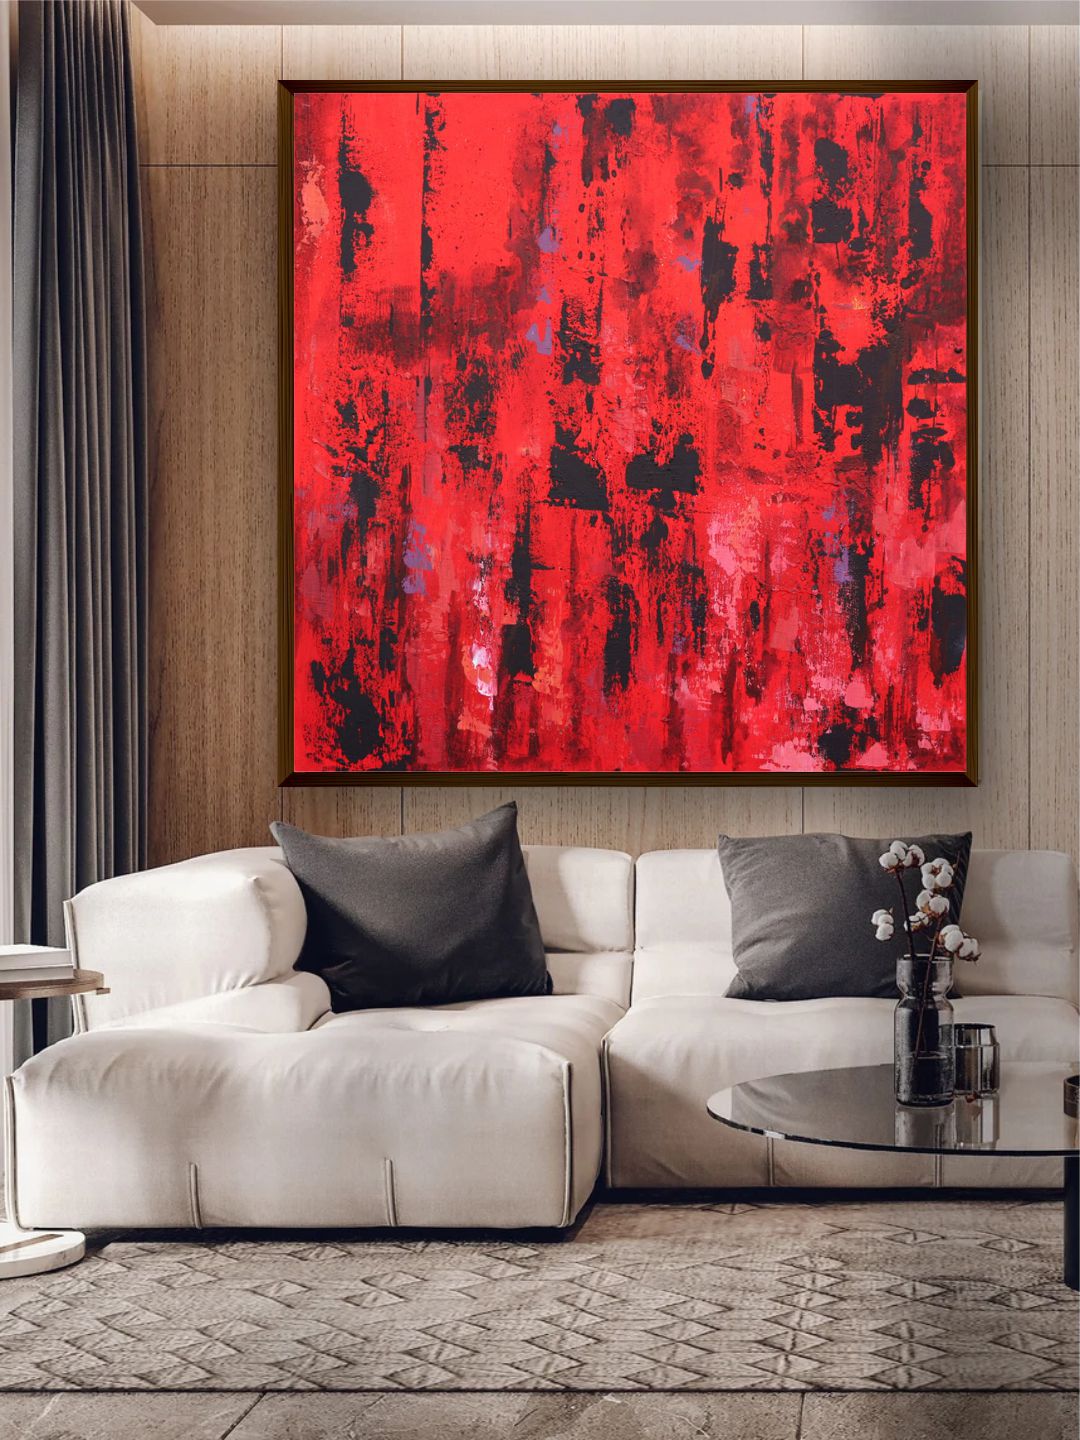 The Art House Red & Black Abstract Framed Wall Painting Price in India